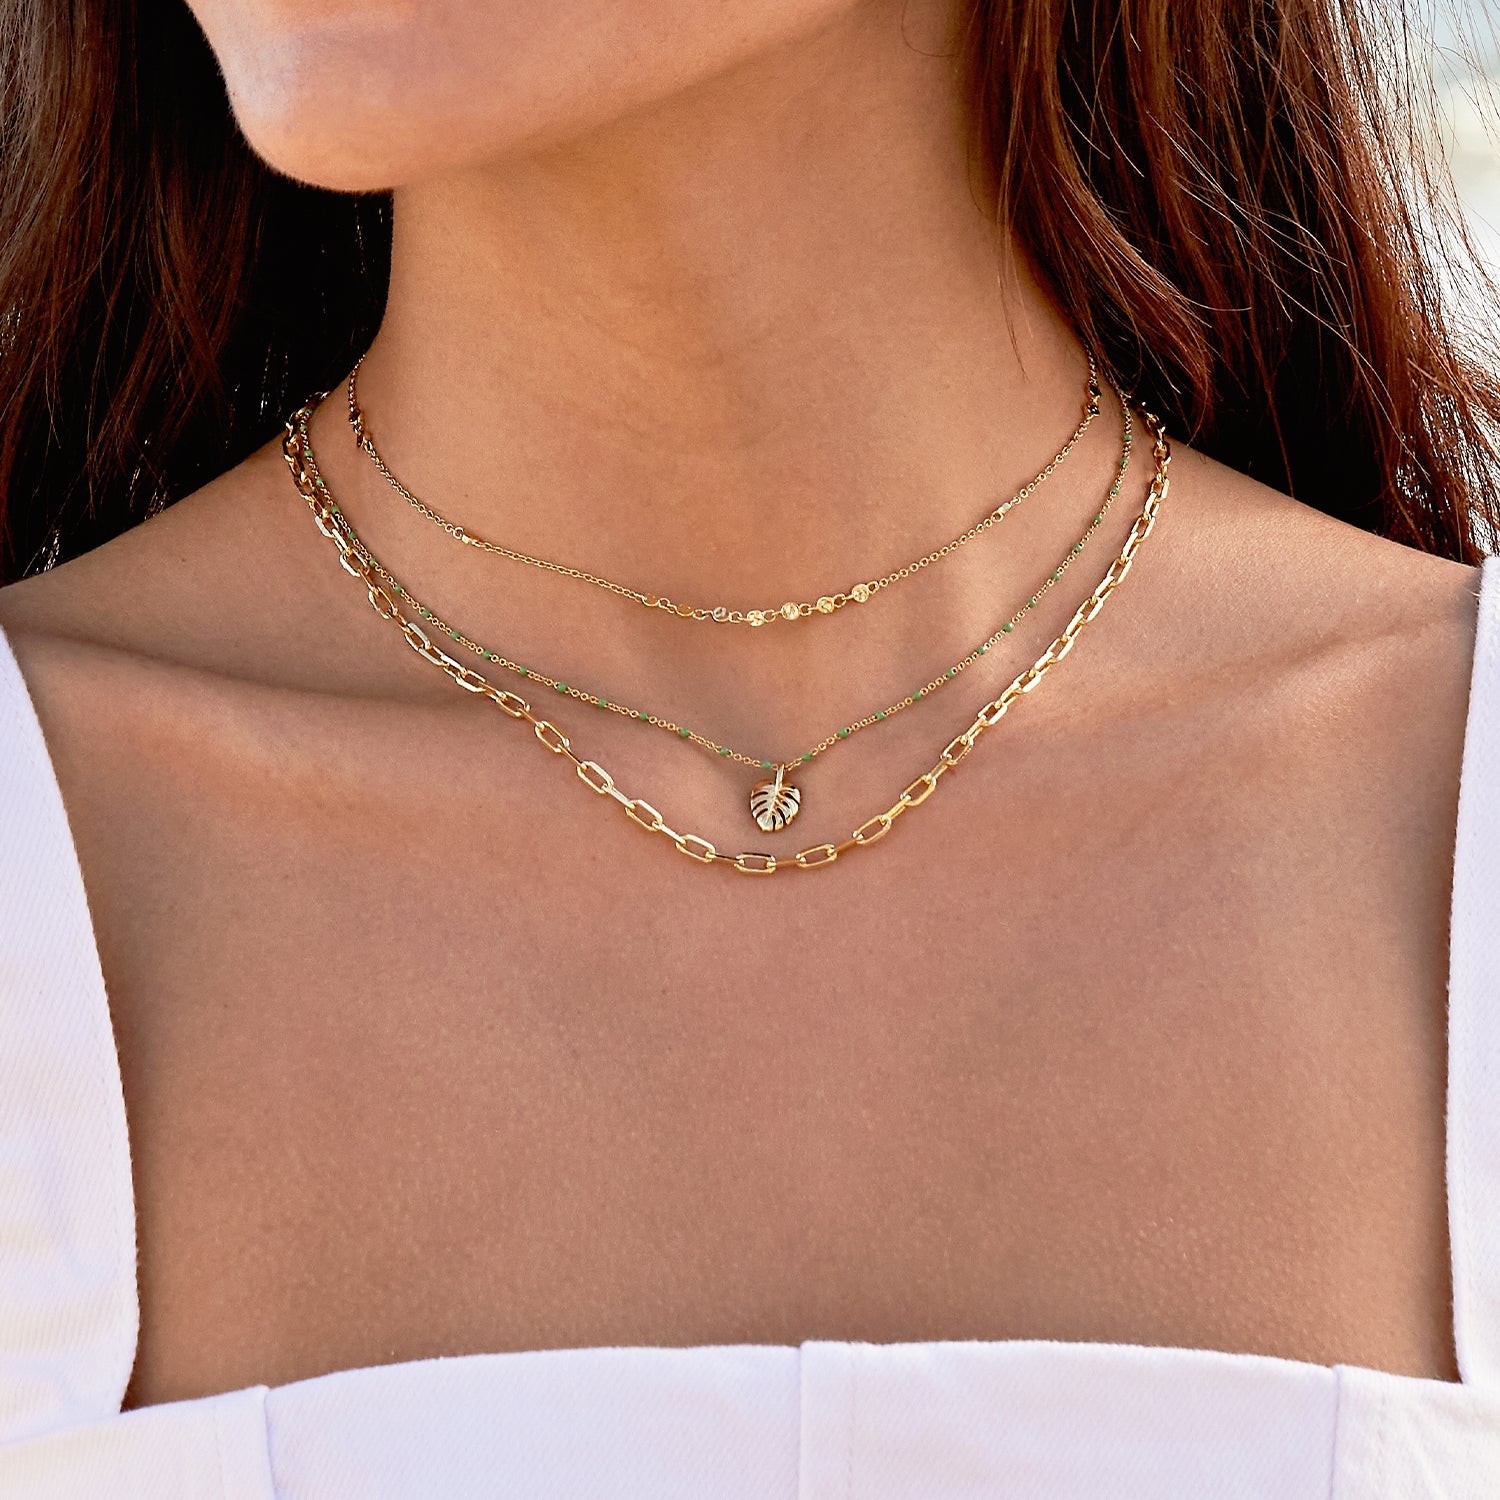 Delicate gold plated choker with little disk accents. by Gorjana